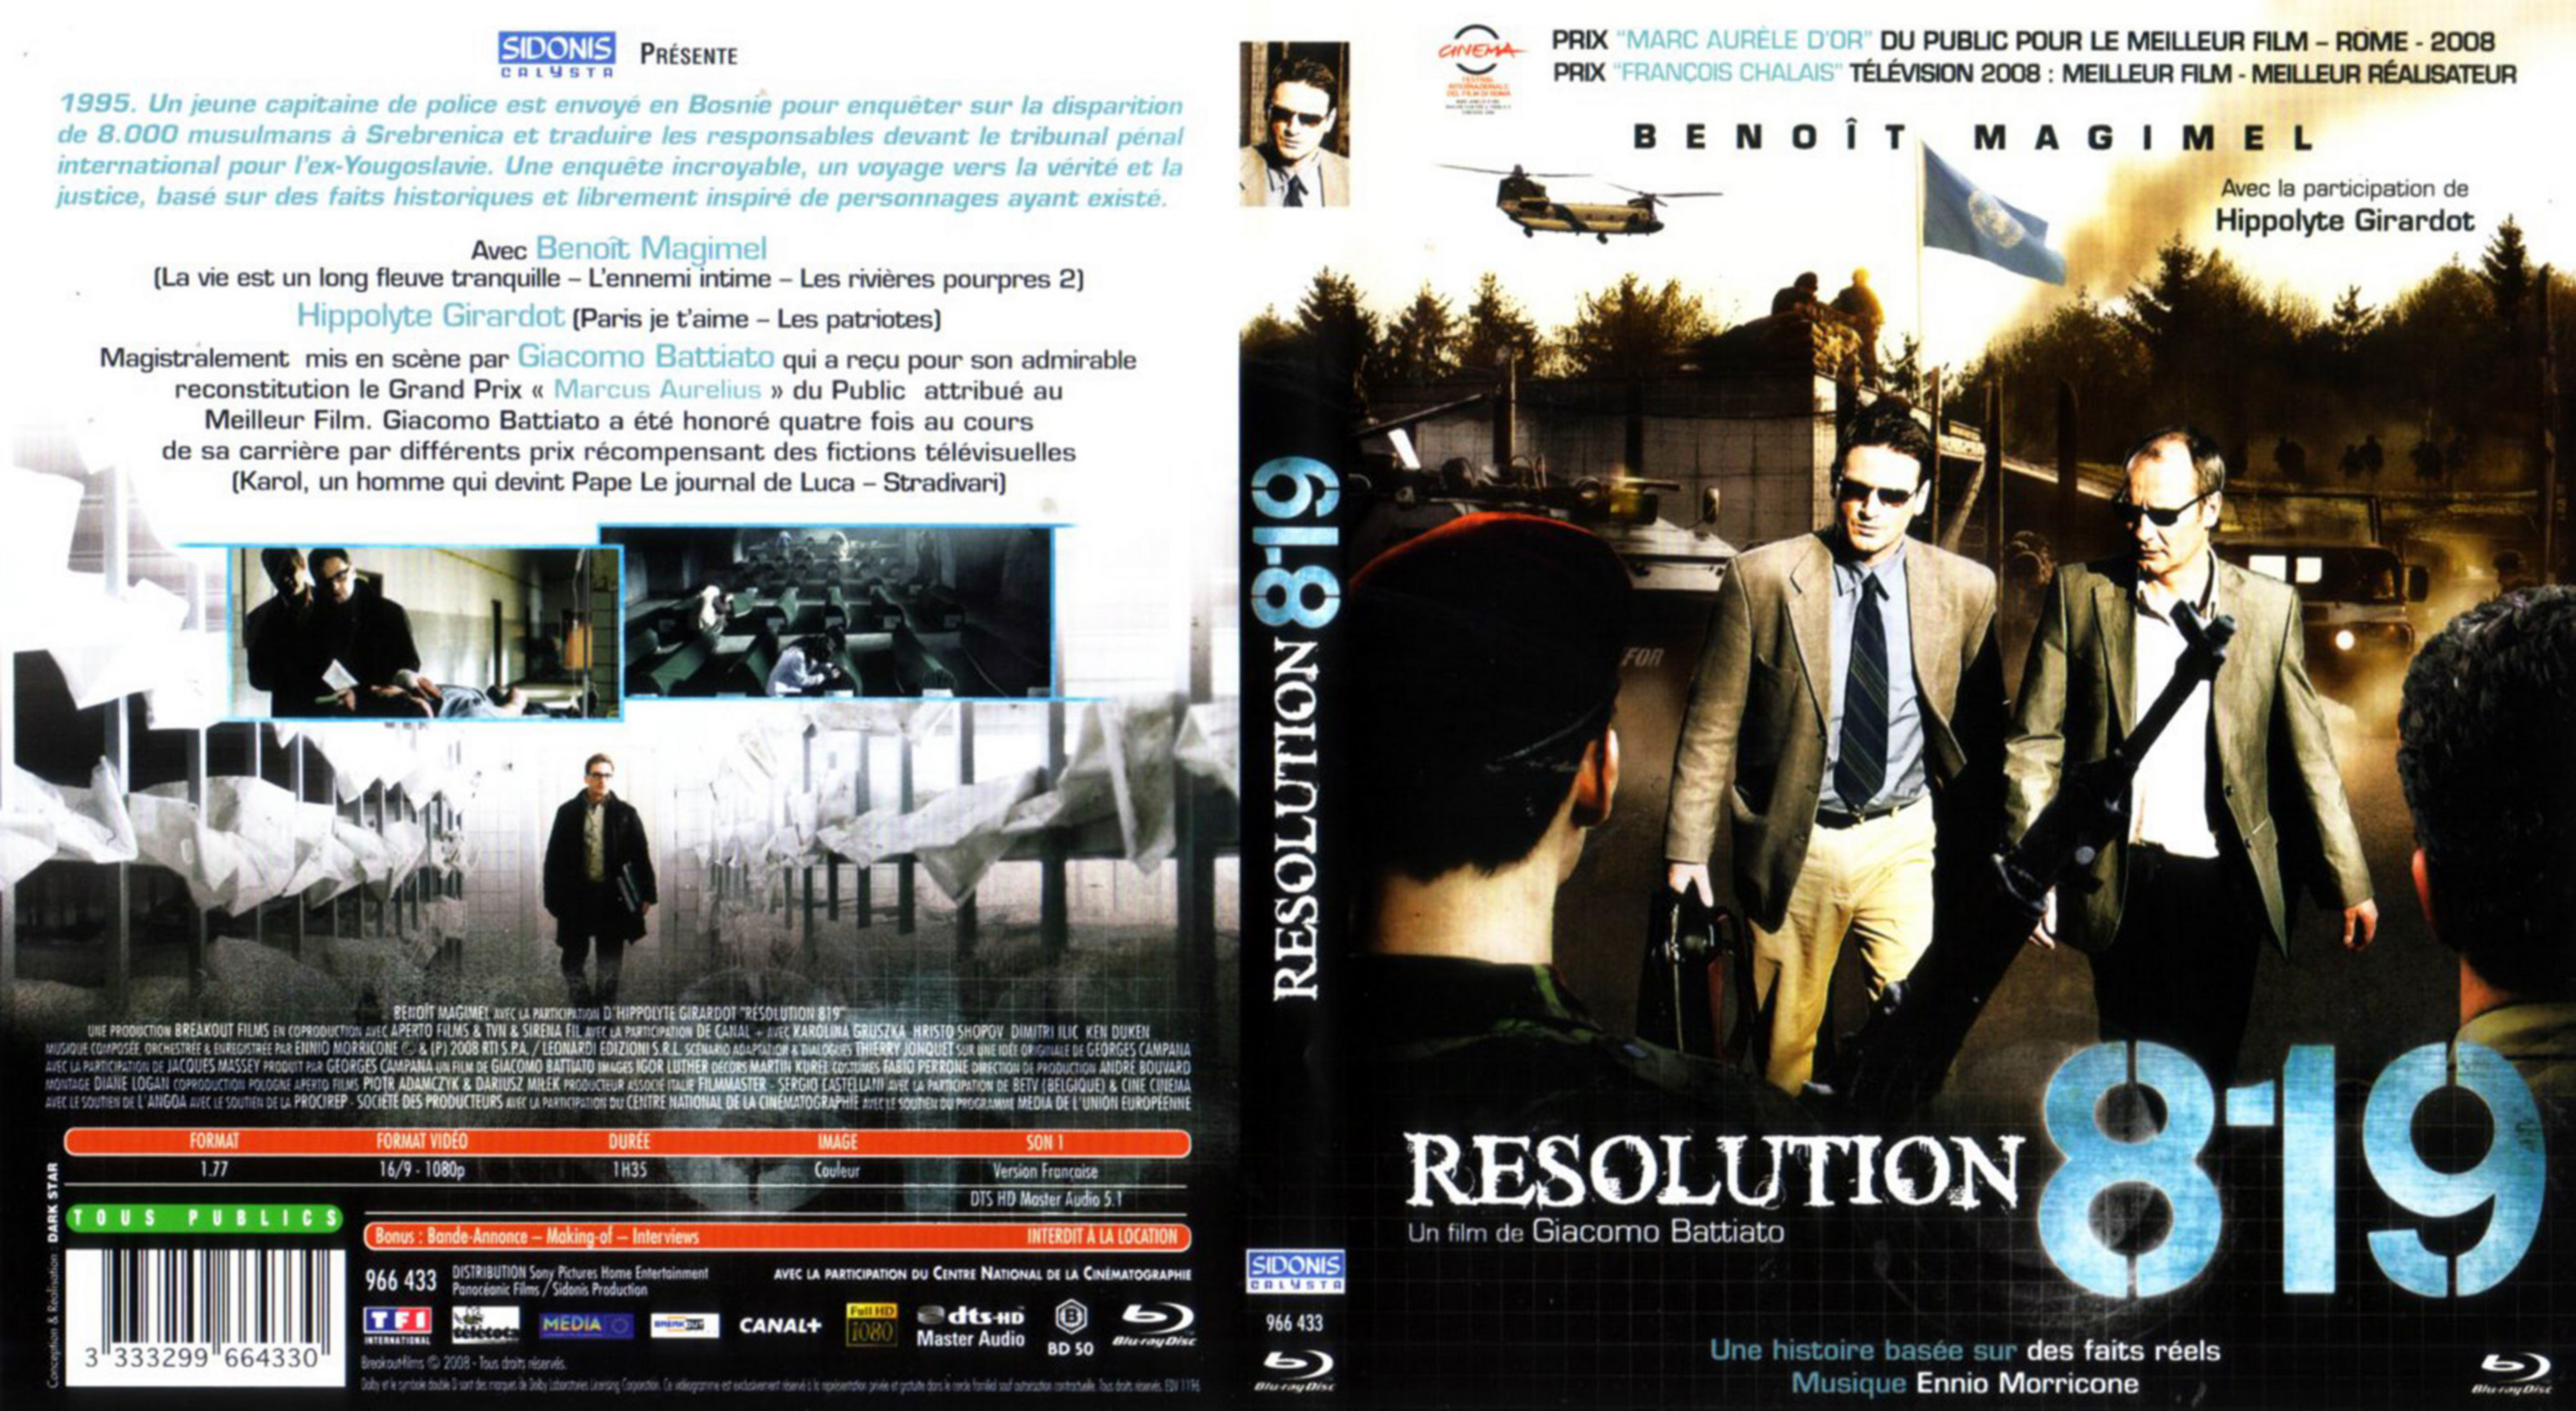 Jaquette DVD Resolution 819 (BLU-RAY)